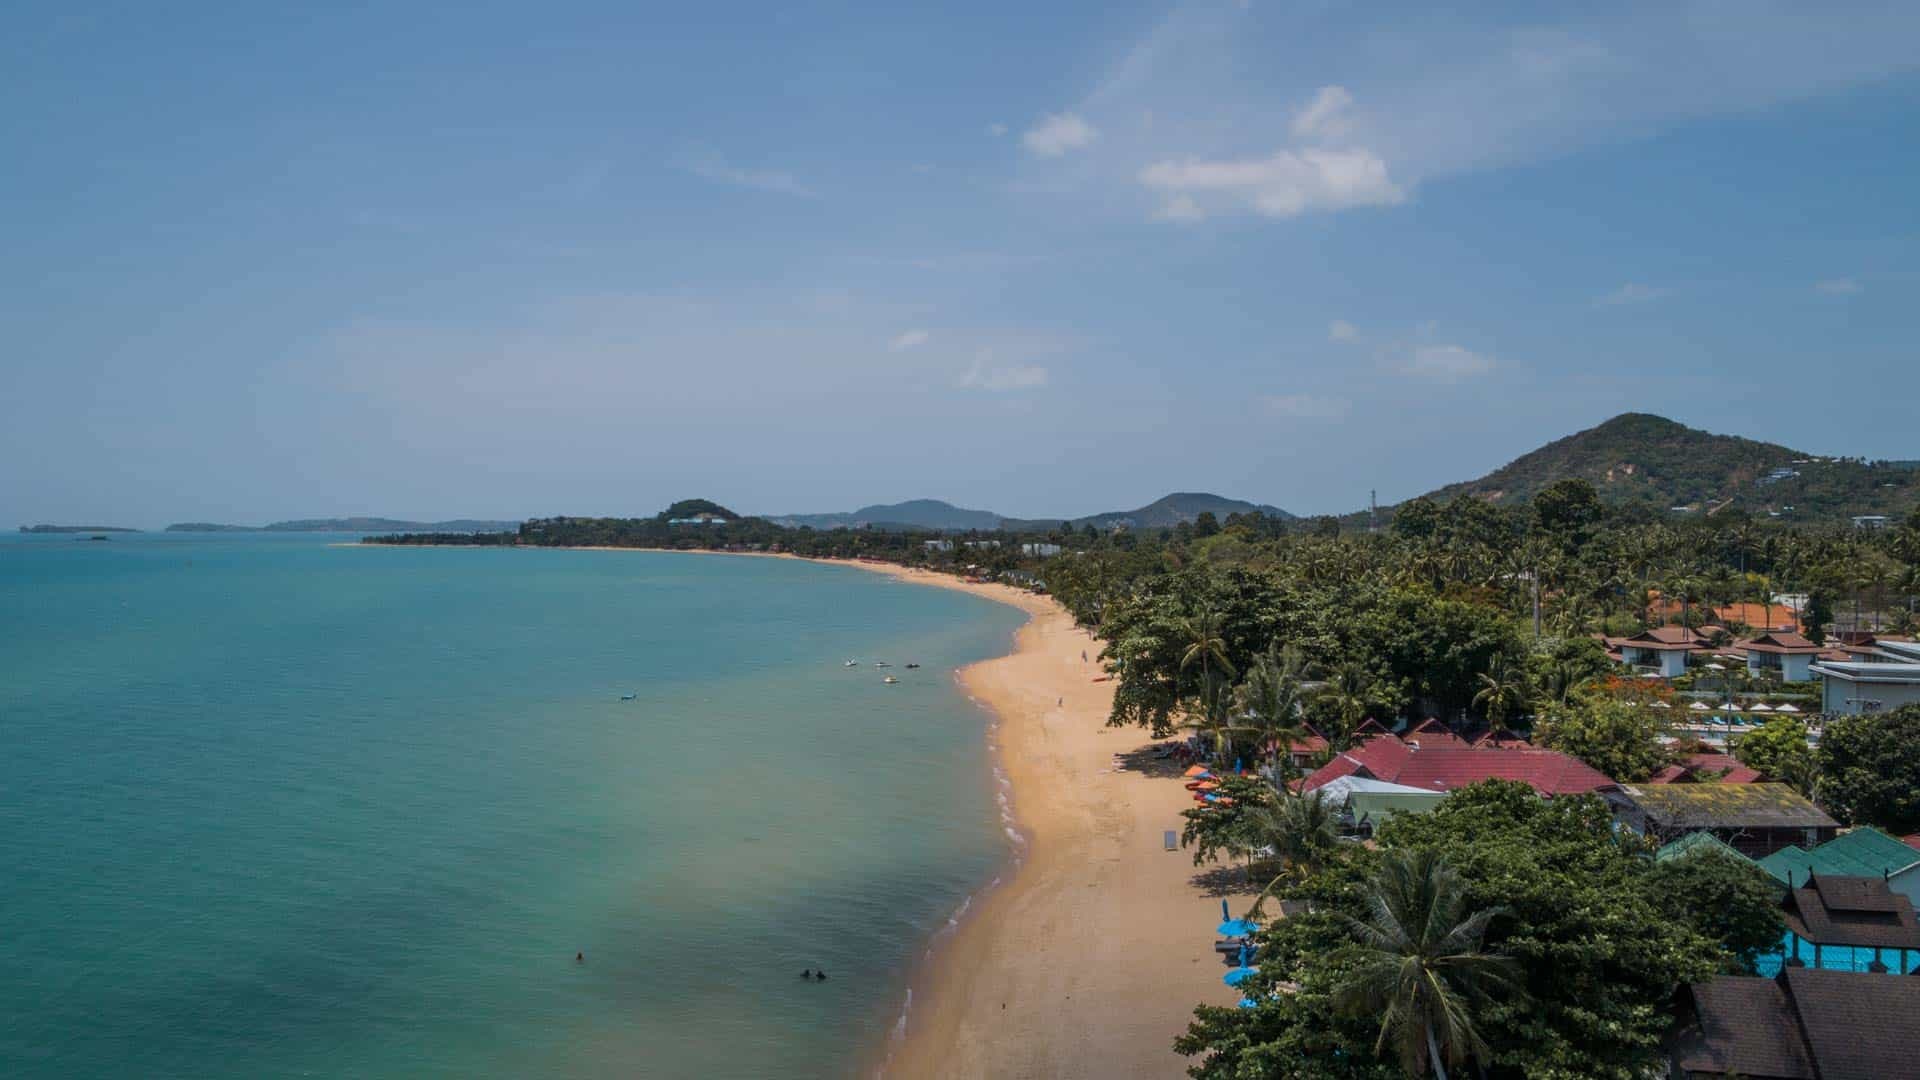 Best things to do, Fun places to visit, Koh Samui attractions, Travel guide, 1920x1080 Full HD Desktop